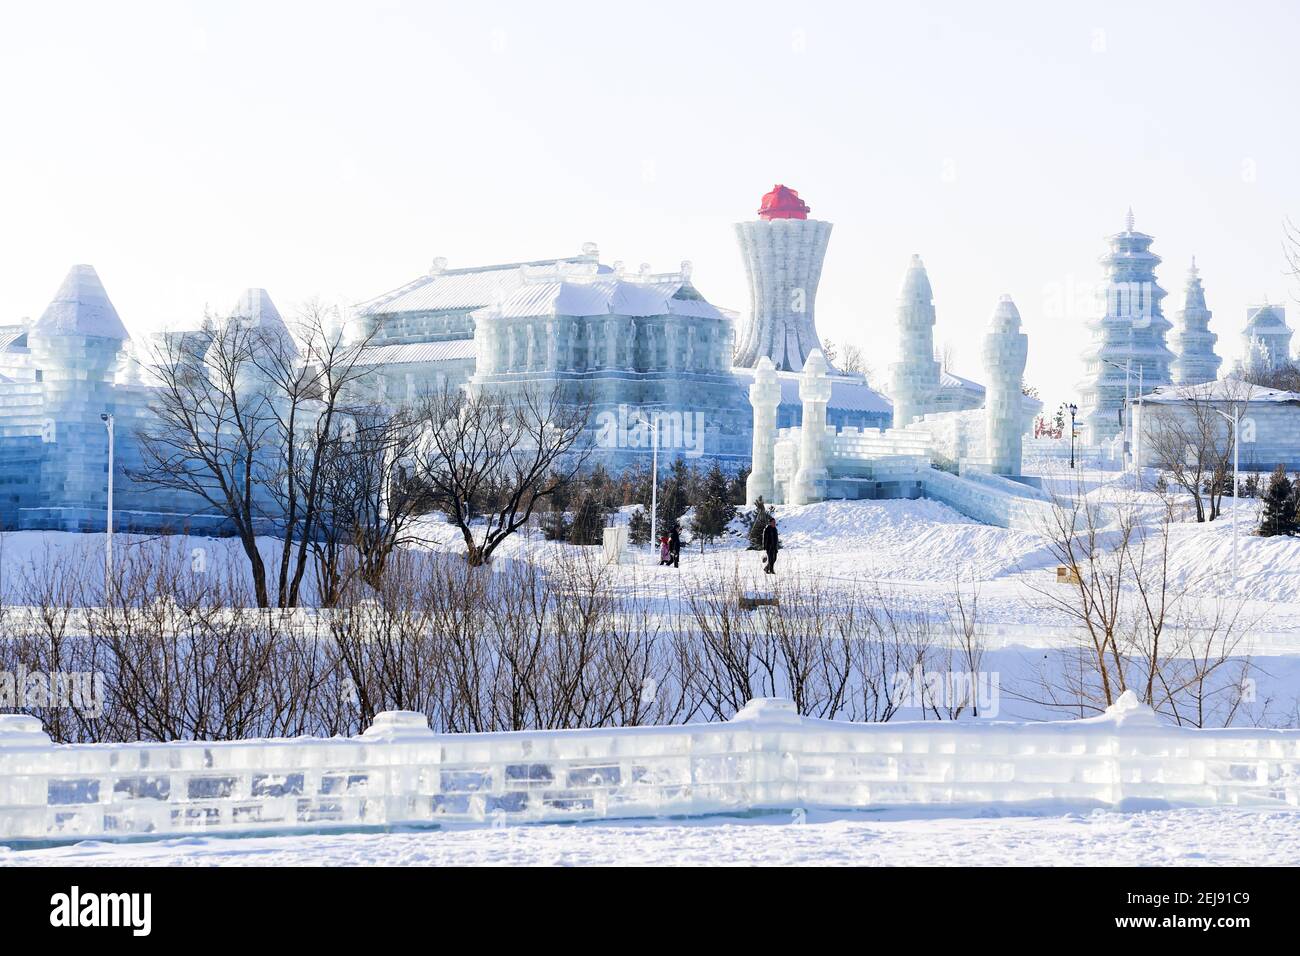 Jilin,CHINA-Changchun, Jilin province, built the ice and snow world for the first time this year with a total of 180,000 cubic meters of ice and 120,000 cubic meters of snow, and built about 130 separate ice and snow sculptures.One of them, a 420-meter-long ice slide, is in the guinness book of world records.(EDITORIAL USE ONLY. CHINA OUT) (Photo by /Sipa USA) Stock Photo